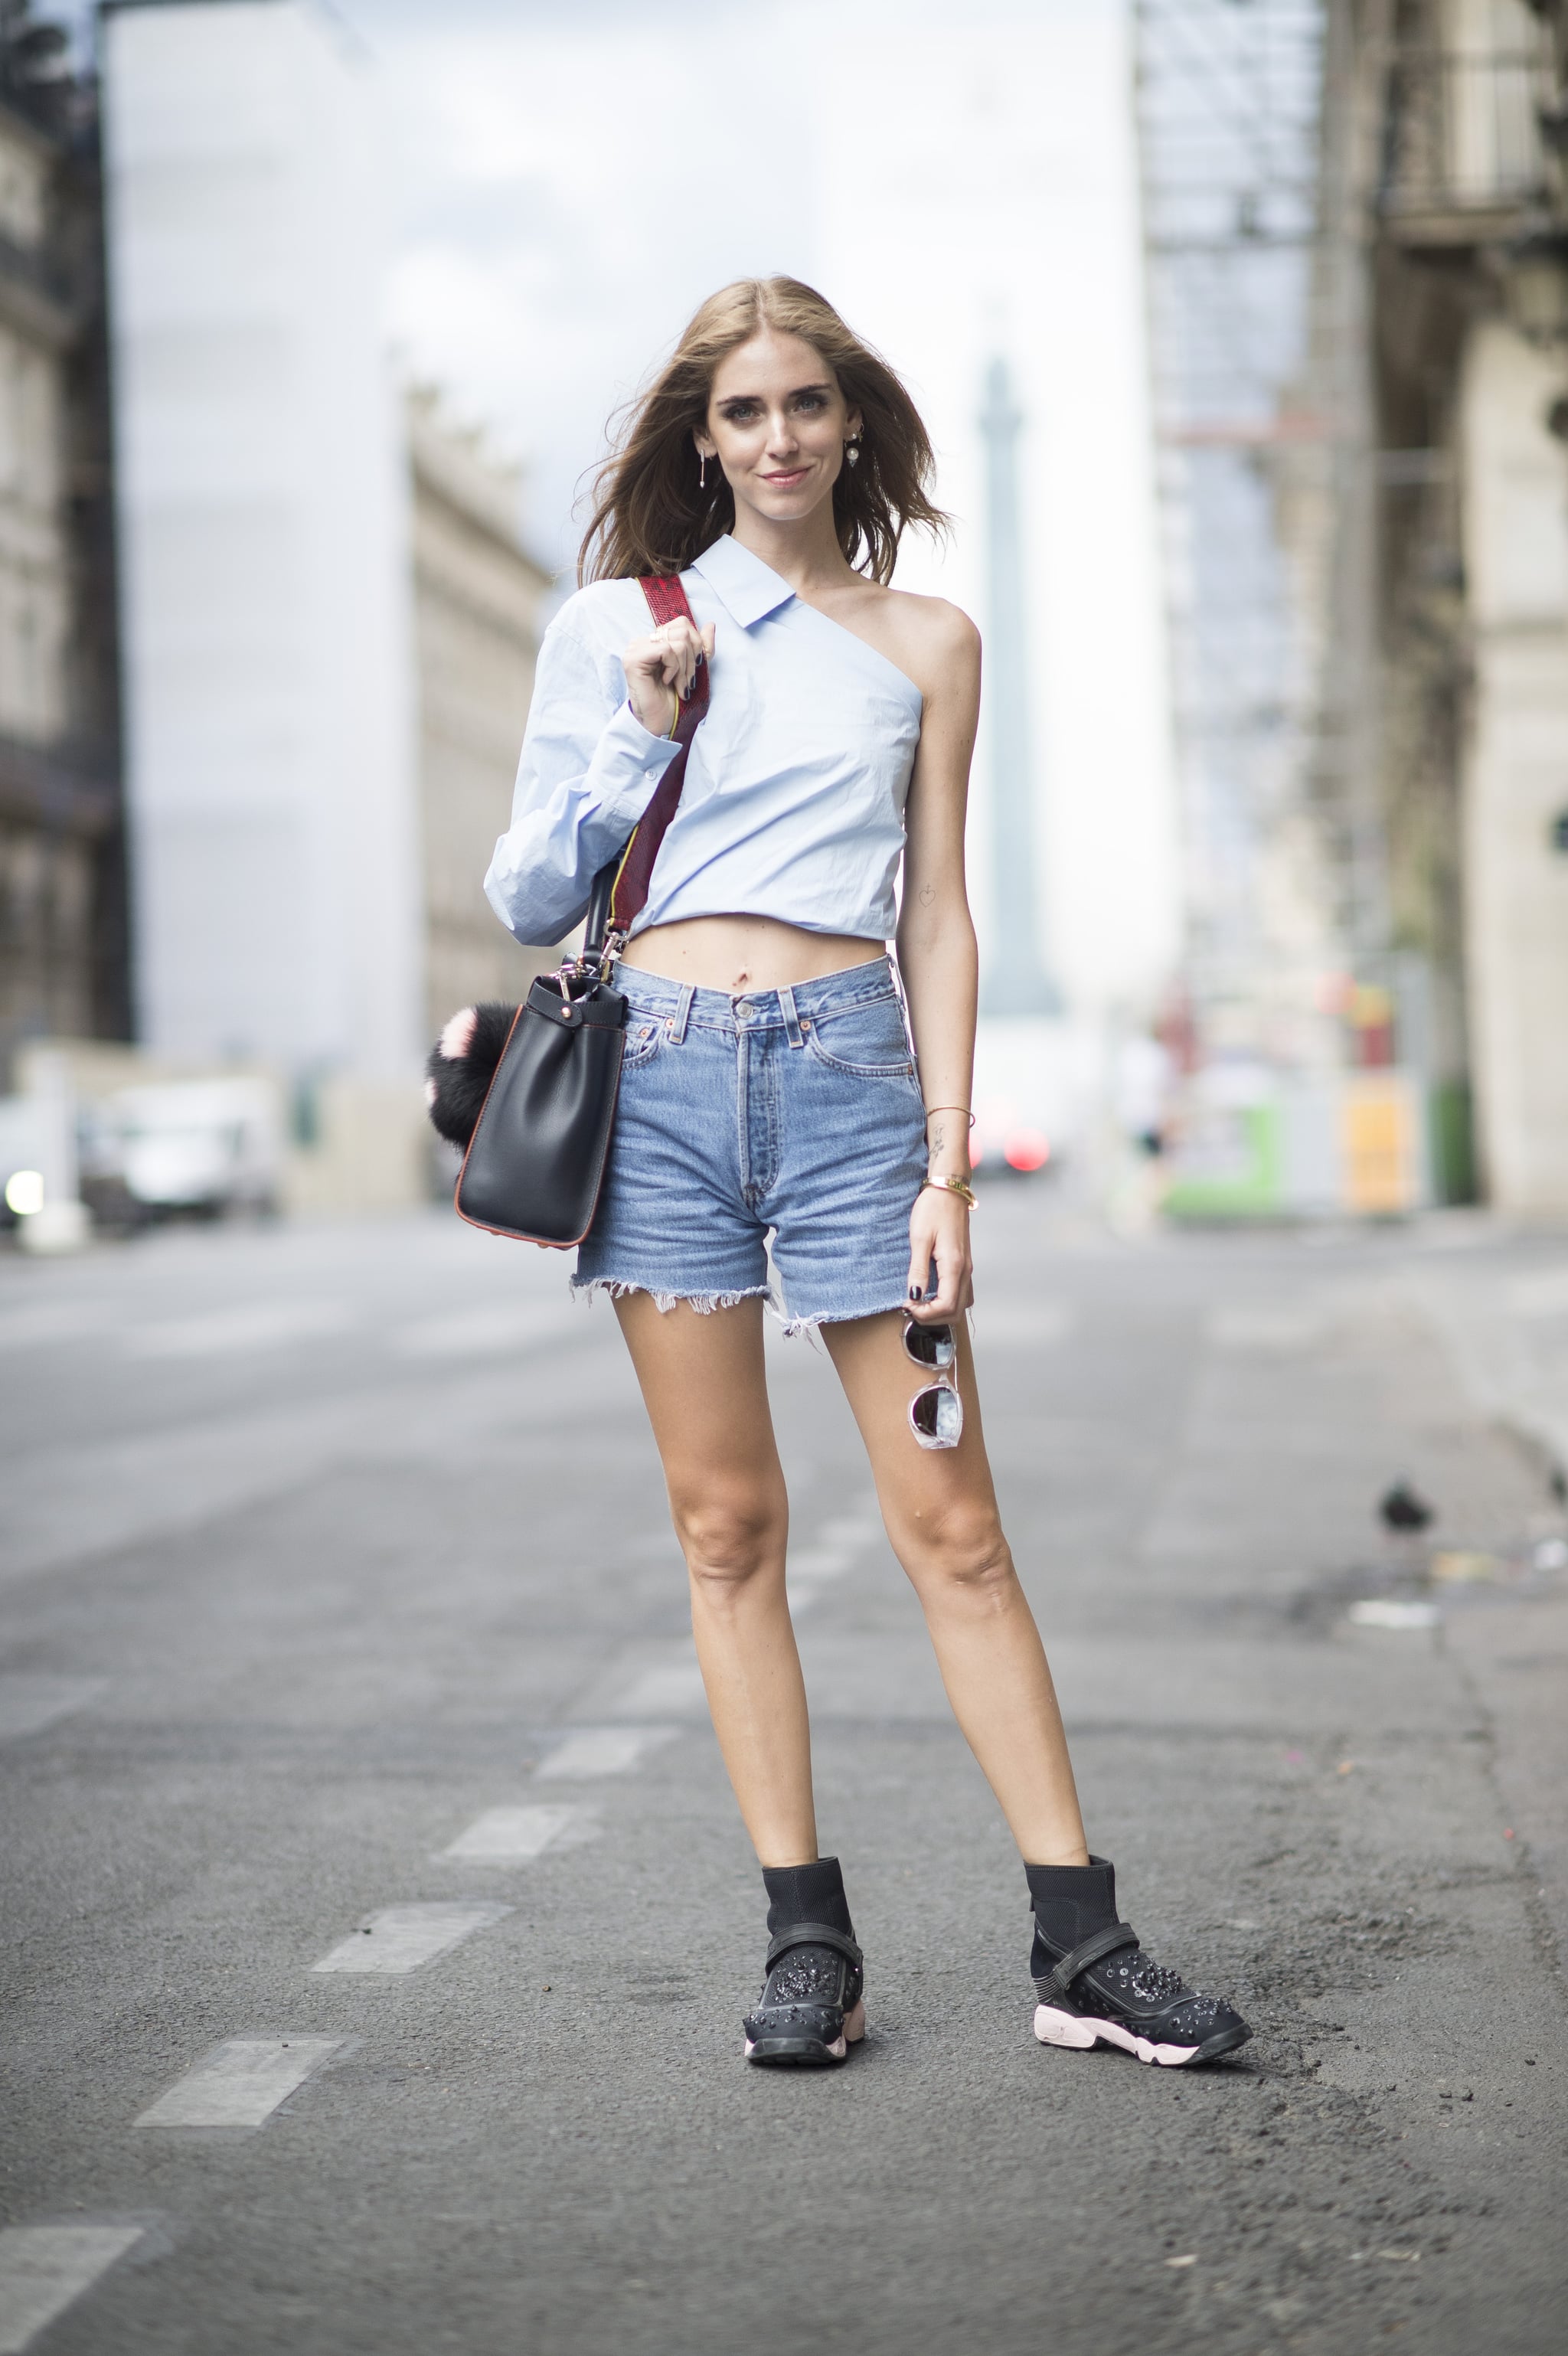 Style a One-Shouldered Top With High-Waisted Shorts, 27 Stylish and  Comfortable Outfit Ideas For POPSUGAR Play/Ground